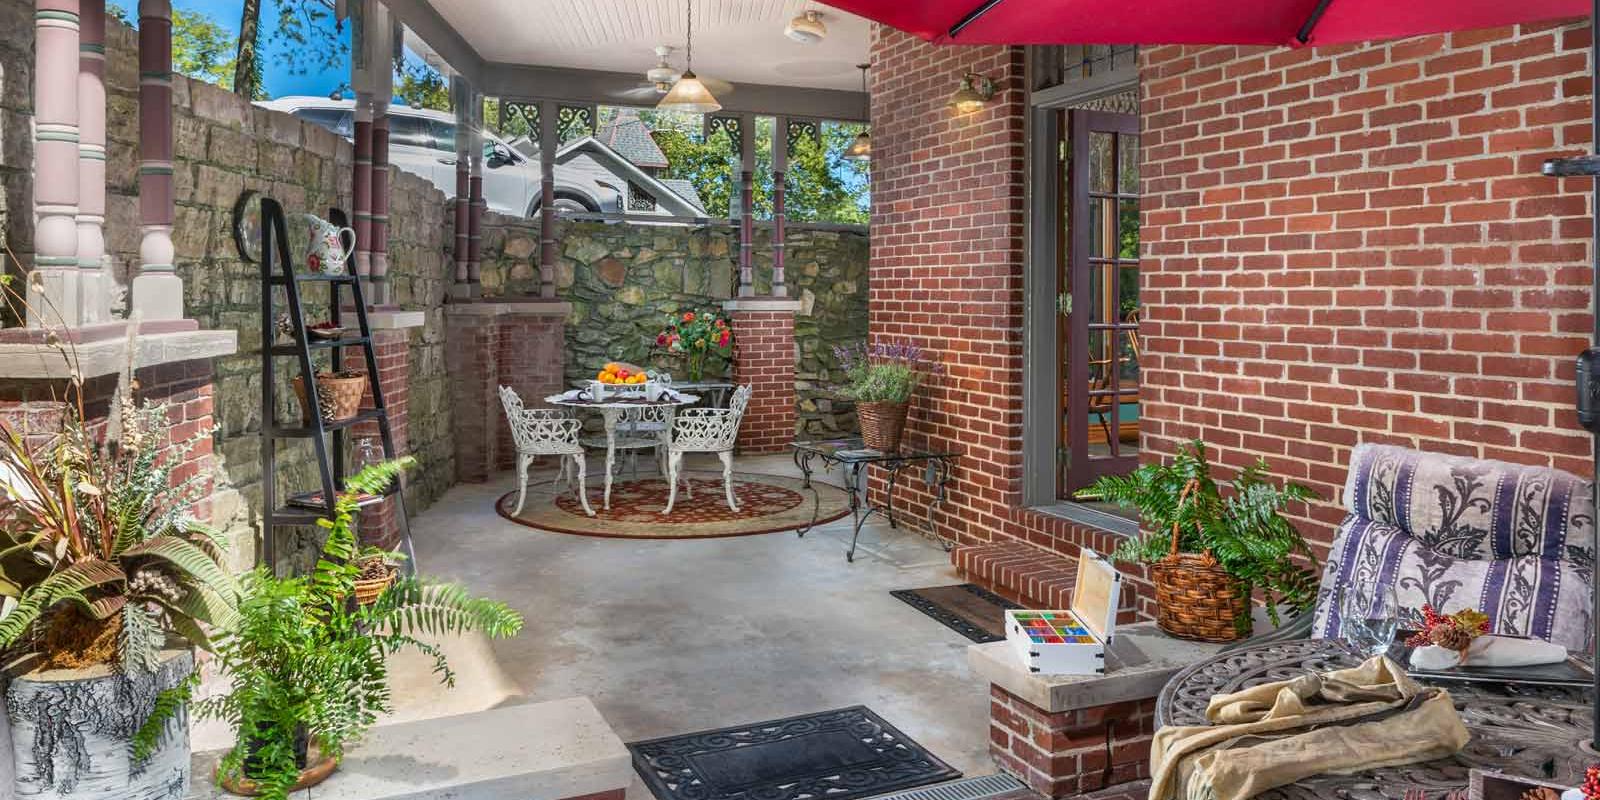 #1 Hotels in Eureka Springs AR | Patio at The Angel at Rose Hall